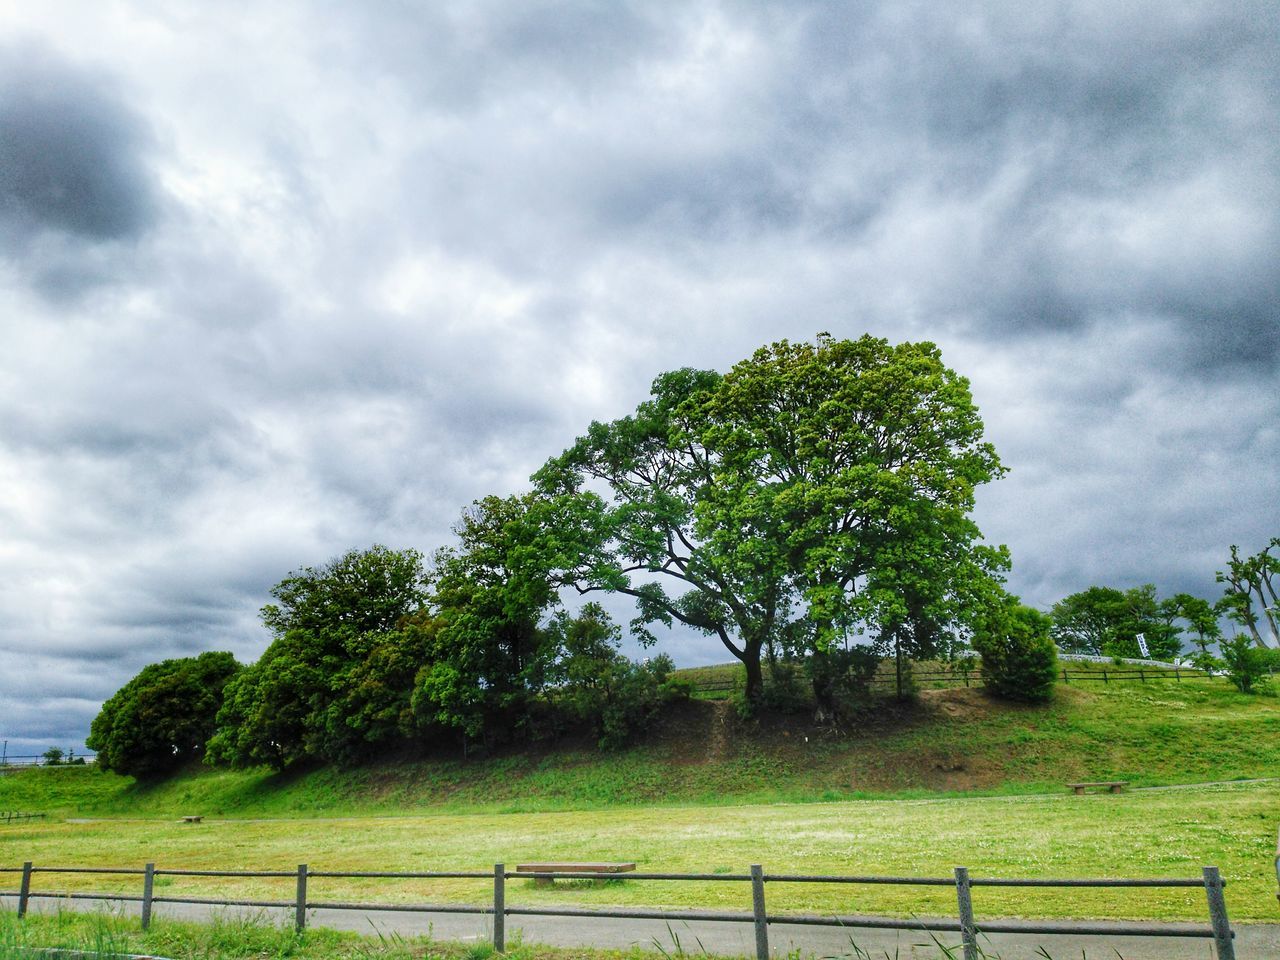 cloud - sky, sky, plant, tree, fence, barrier, boundary, nature, grass, beauty in nature, field, green color, land, tranquility, no people, landscape, growth, day, environment, tranquil scene, outdoors